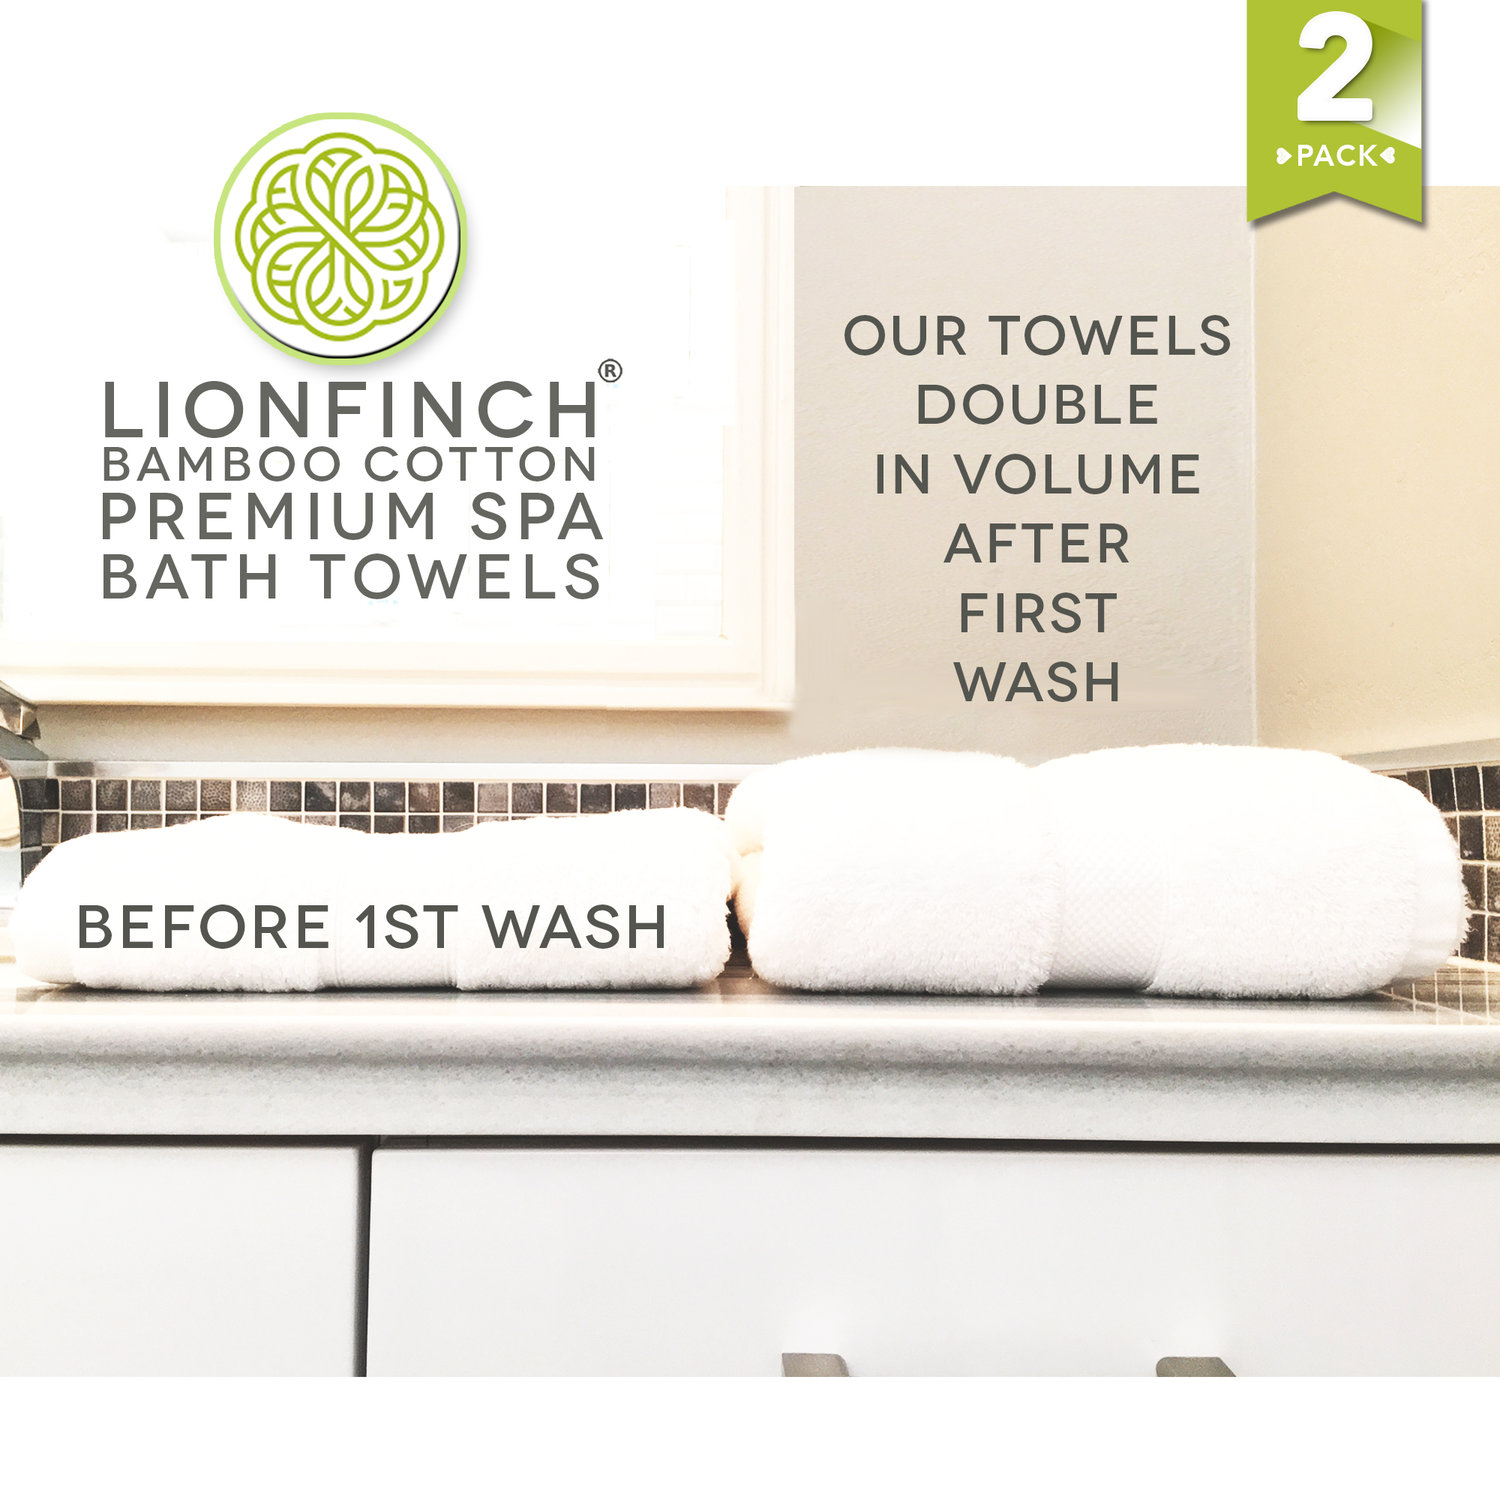 Luxury Spa Bath Towels. Bright White-Set of 2. Crafted from